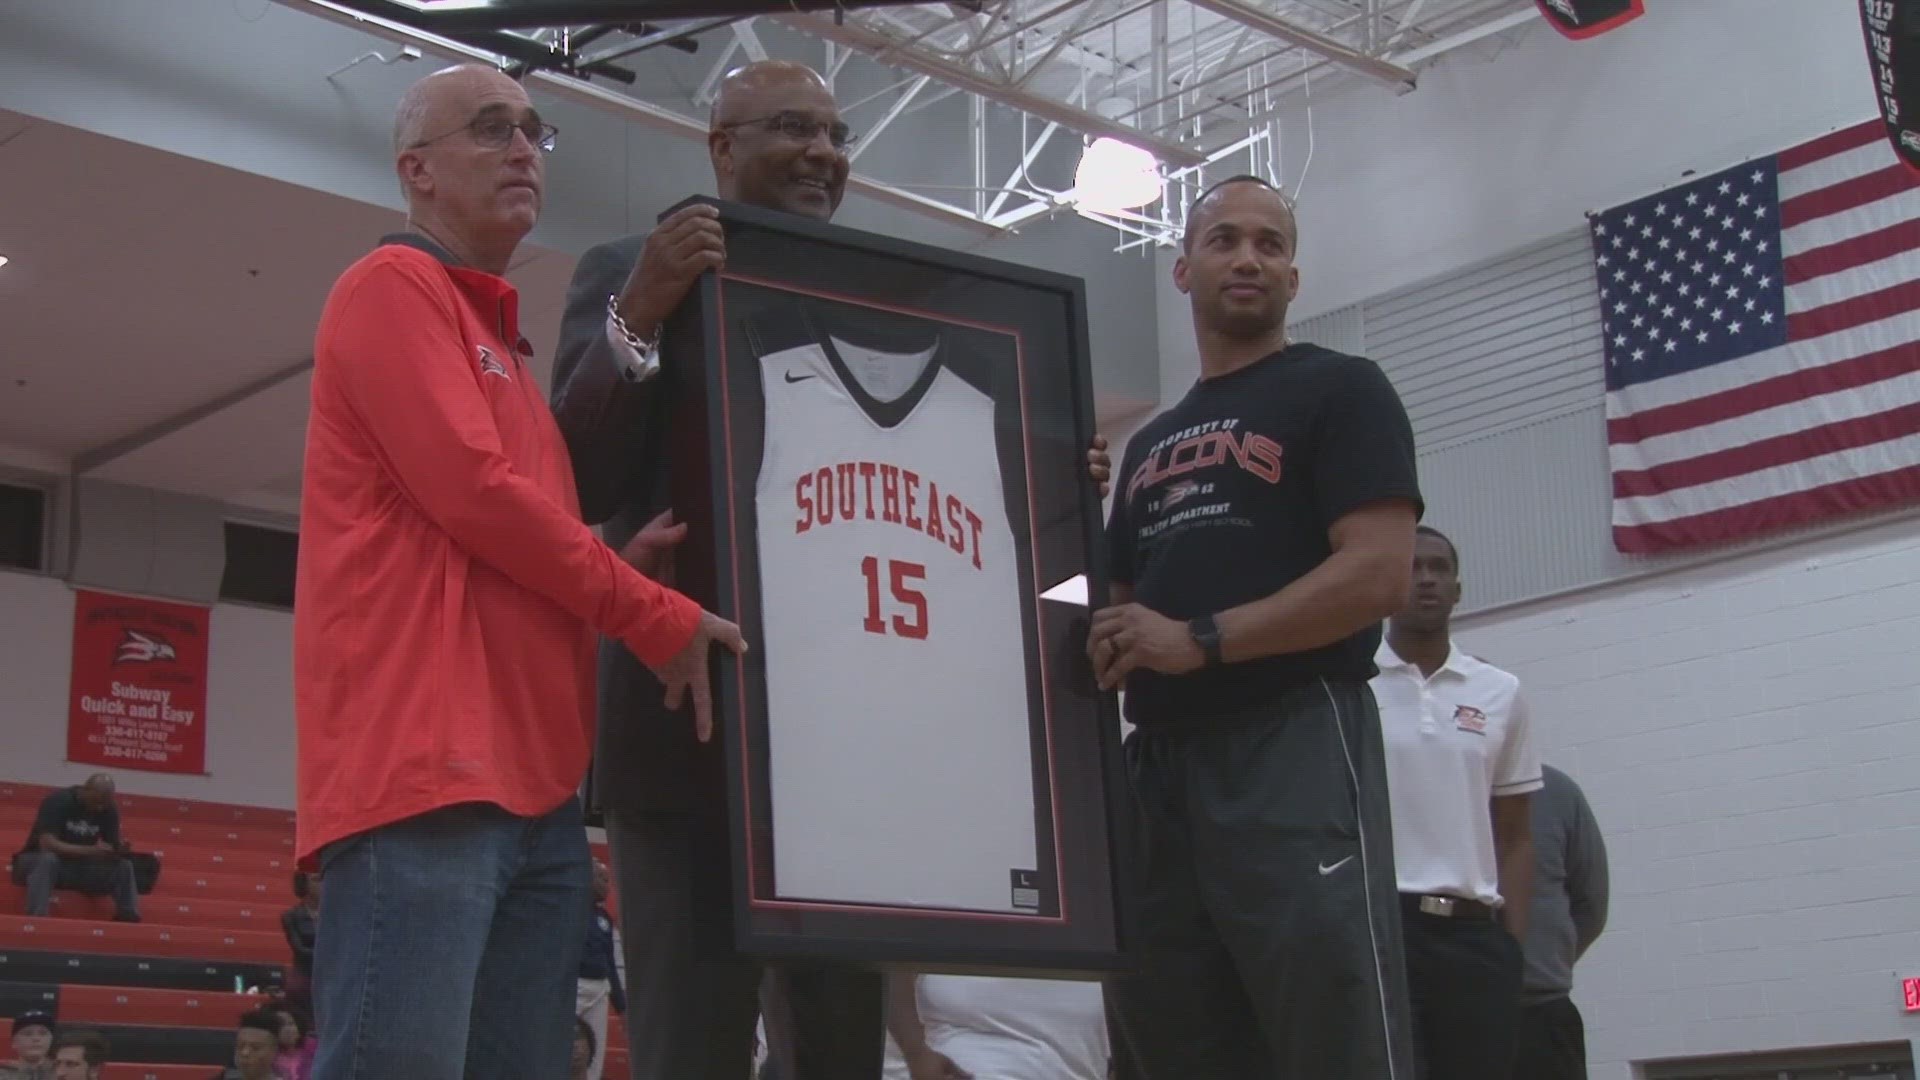 The Facilities Naming Committee wants to name the Southeast Guilford High School basketball court after Greensboro native, Fred Whitfield.